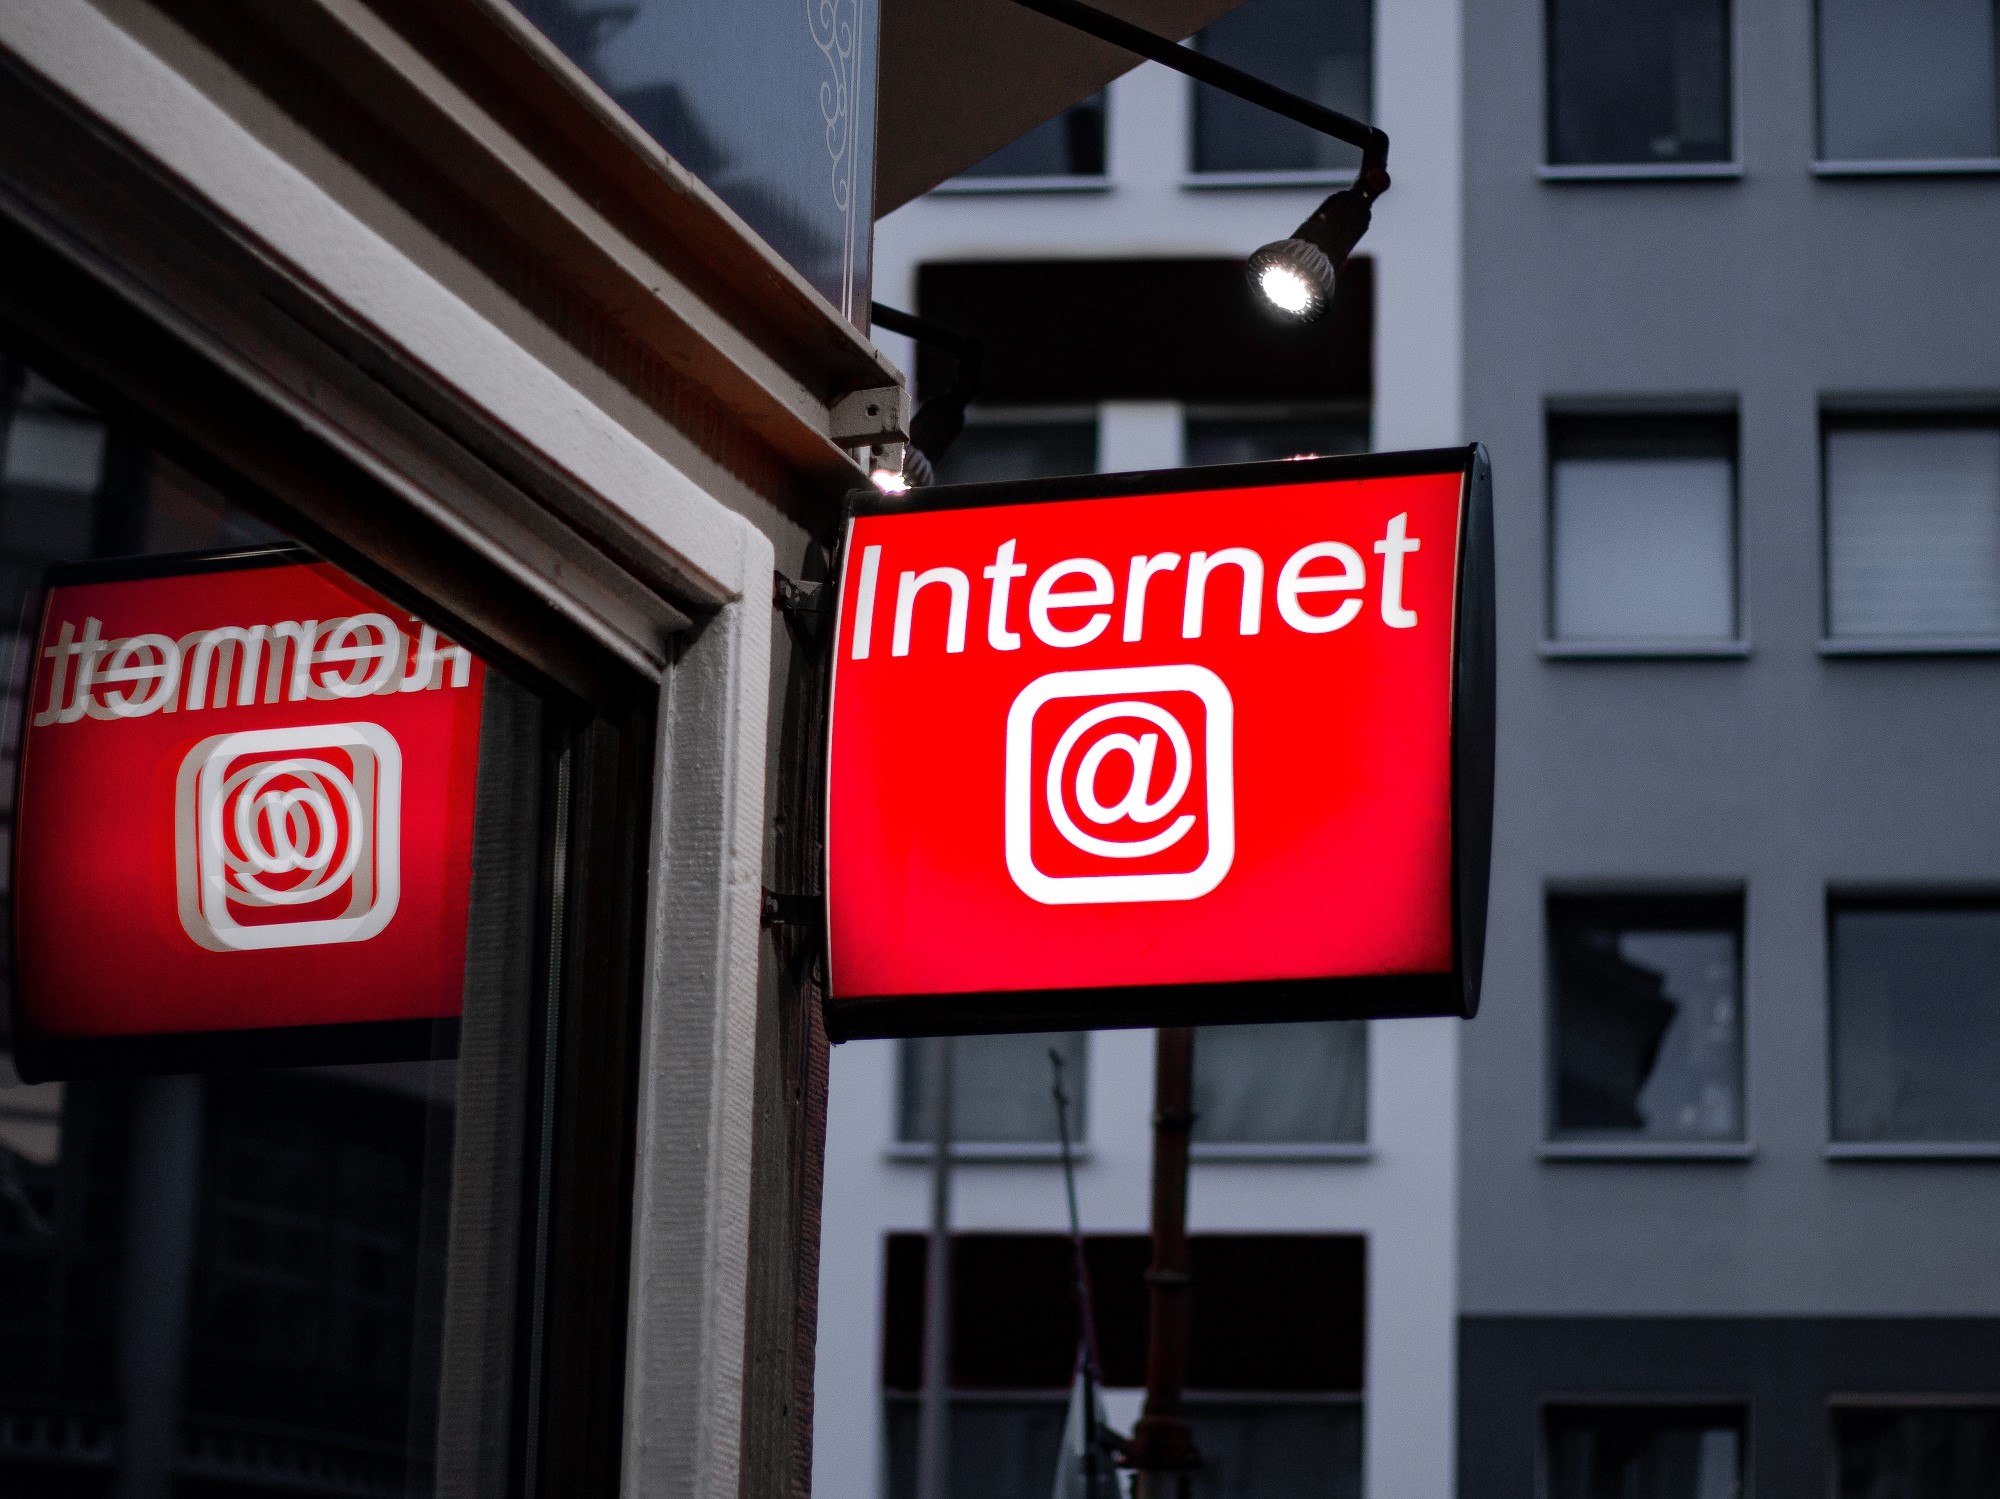 Red Internet LED Signage beside building near buildings Photo by Leon Seibert on Unsplash